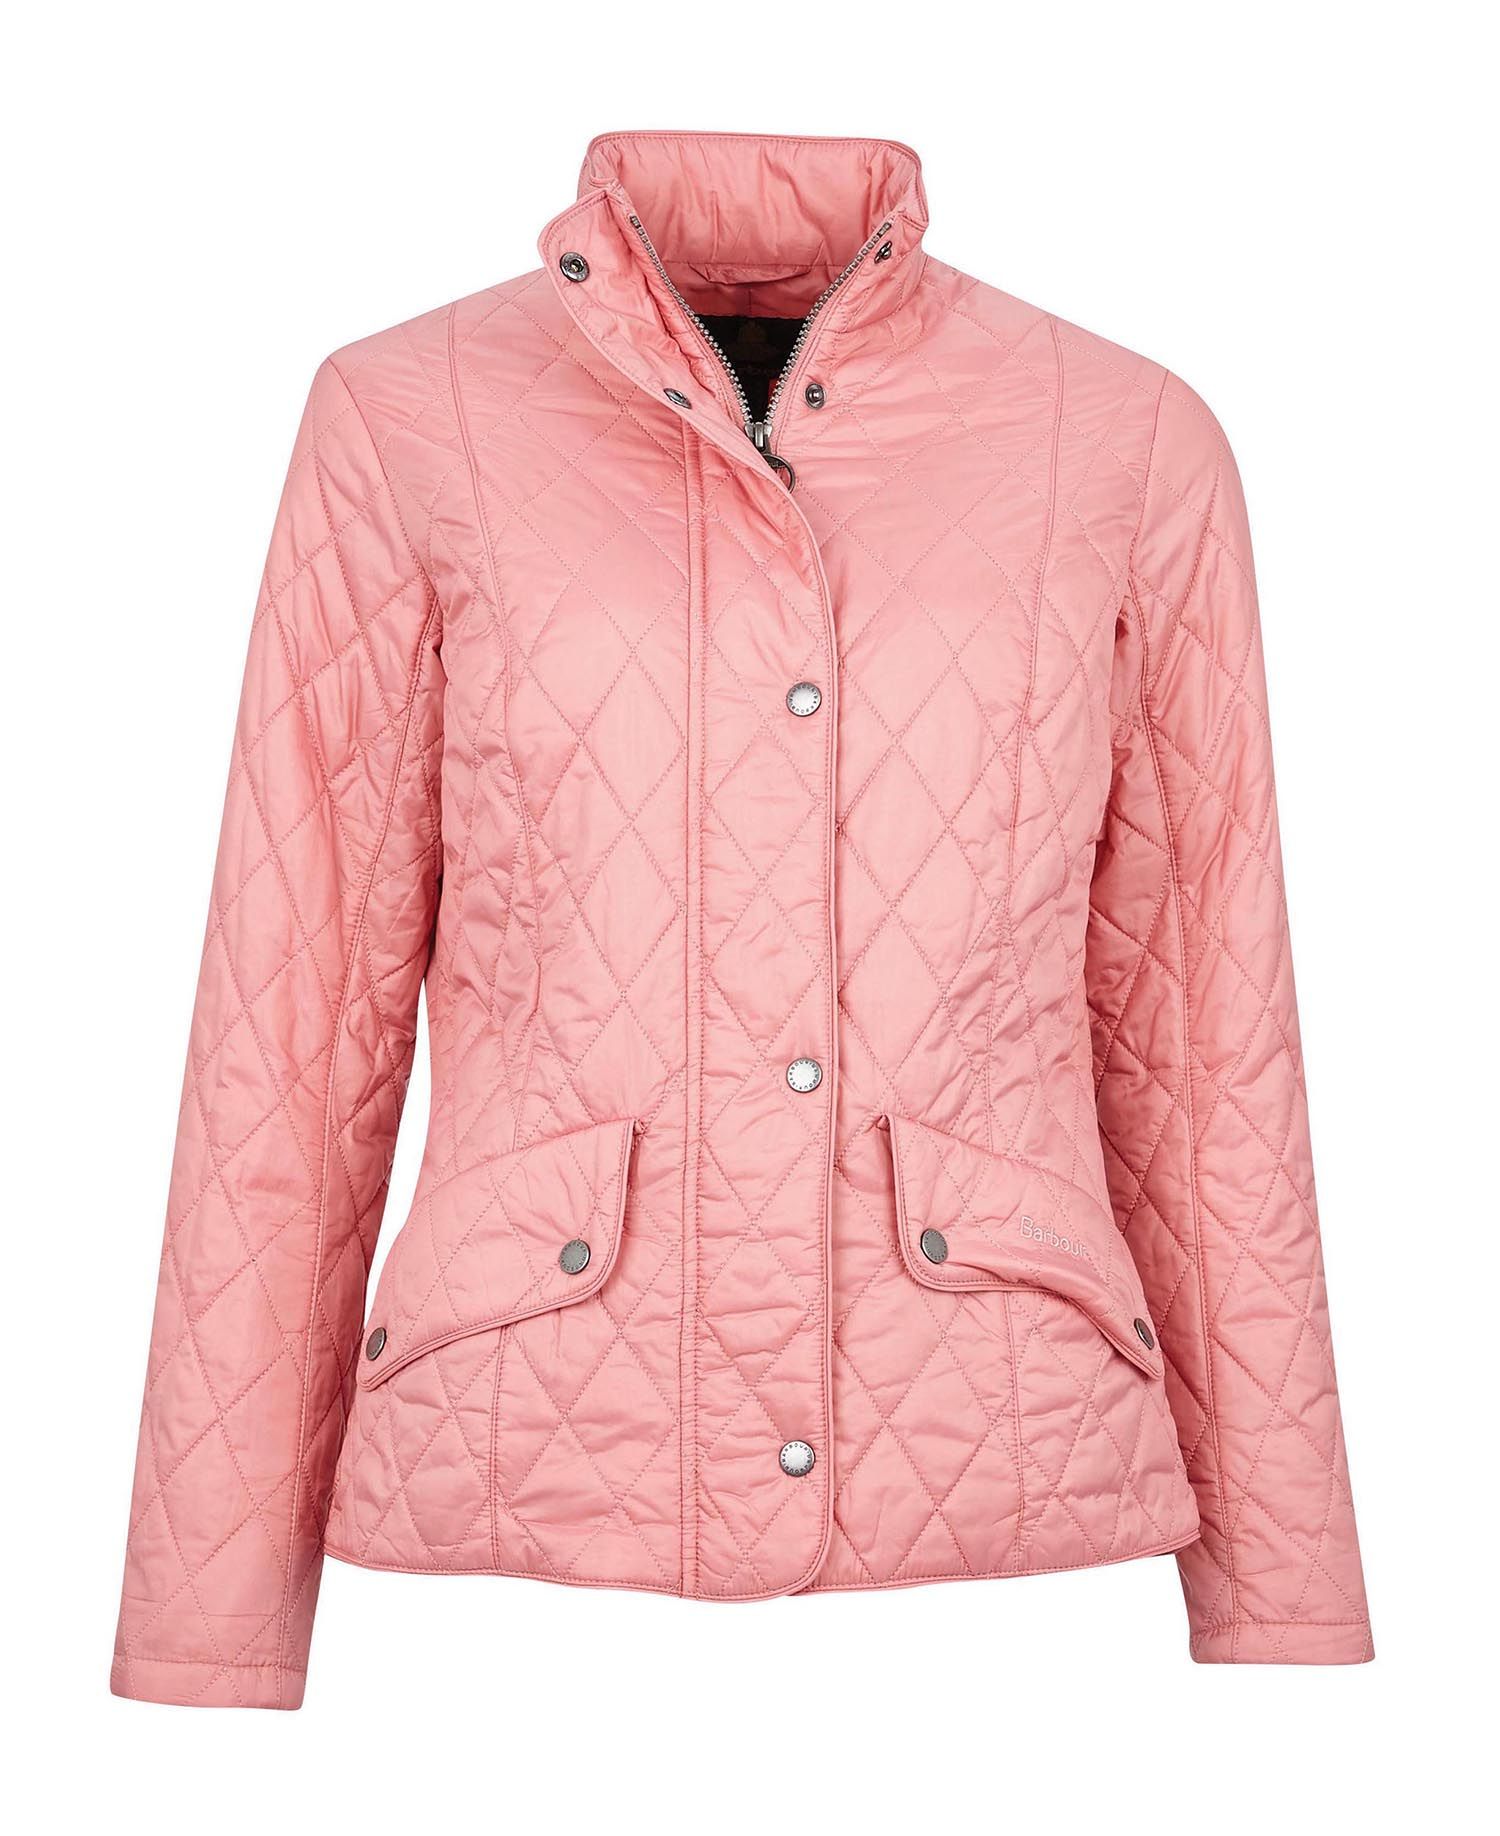 Barbour Flyweight Cavalry Quilted Jacket - Dusty Rose ...